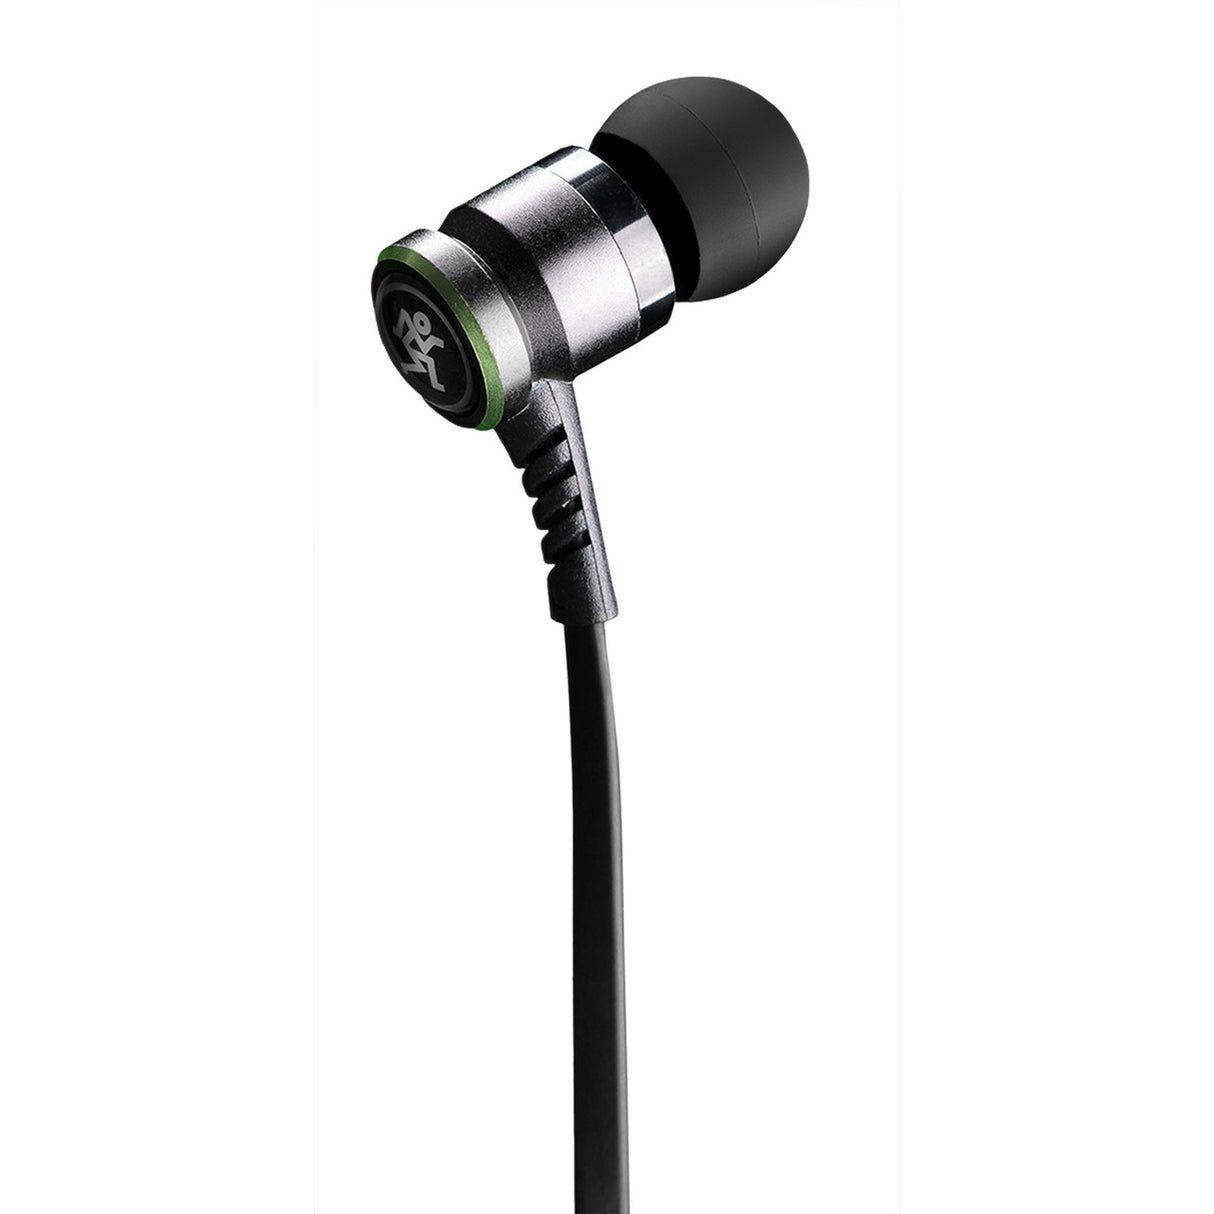 Mackie CR-Buds High Performance Earphone with Mic and Control (Used)